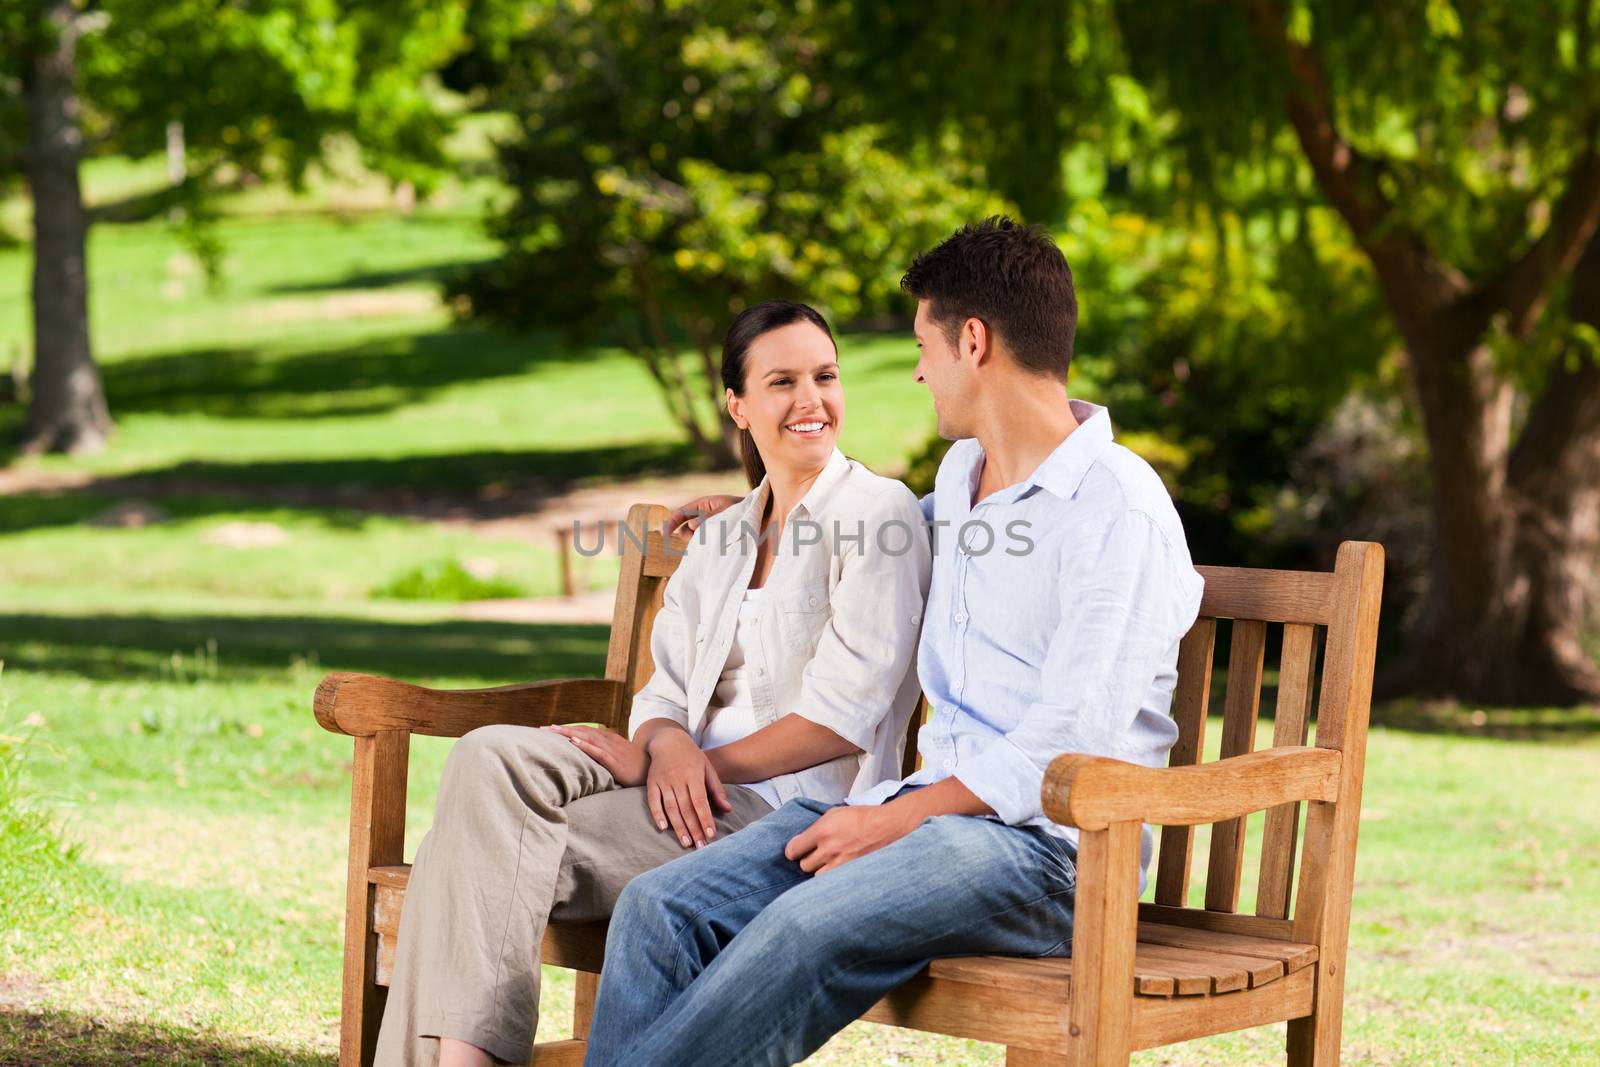 Couple on the bench during the summer